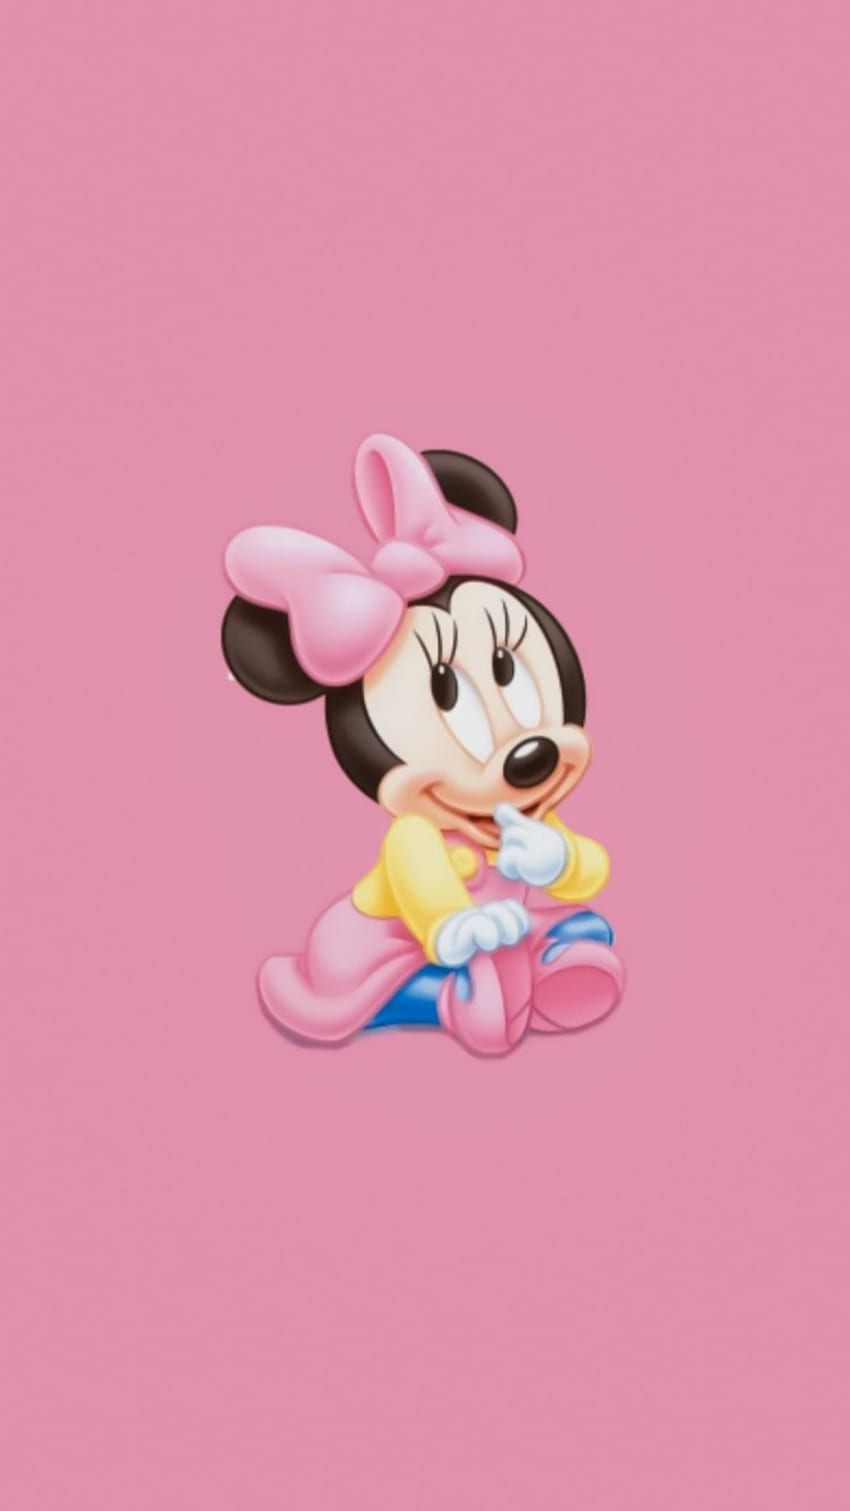 A pink background with minnie mouse on it - Minnie Mouse